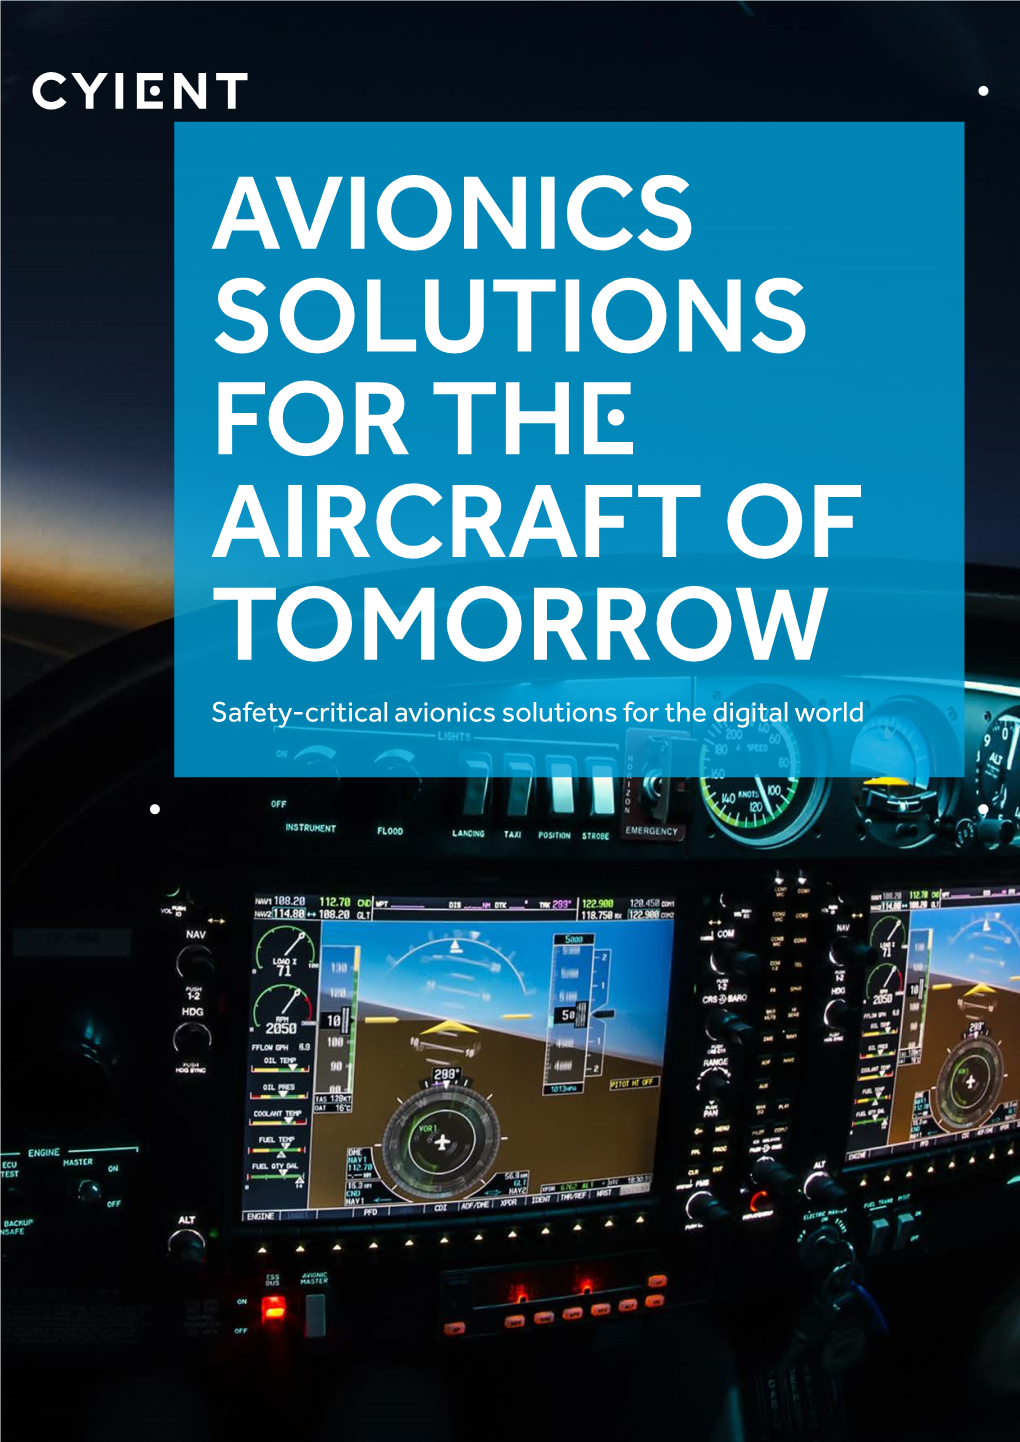 Avionics Solutions for the Aircraft of Tomorrow